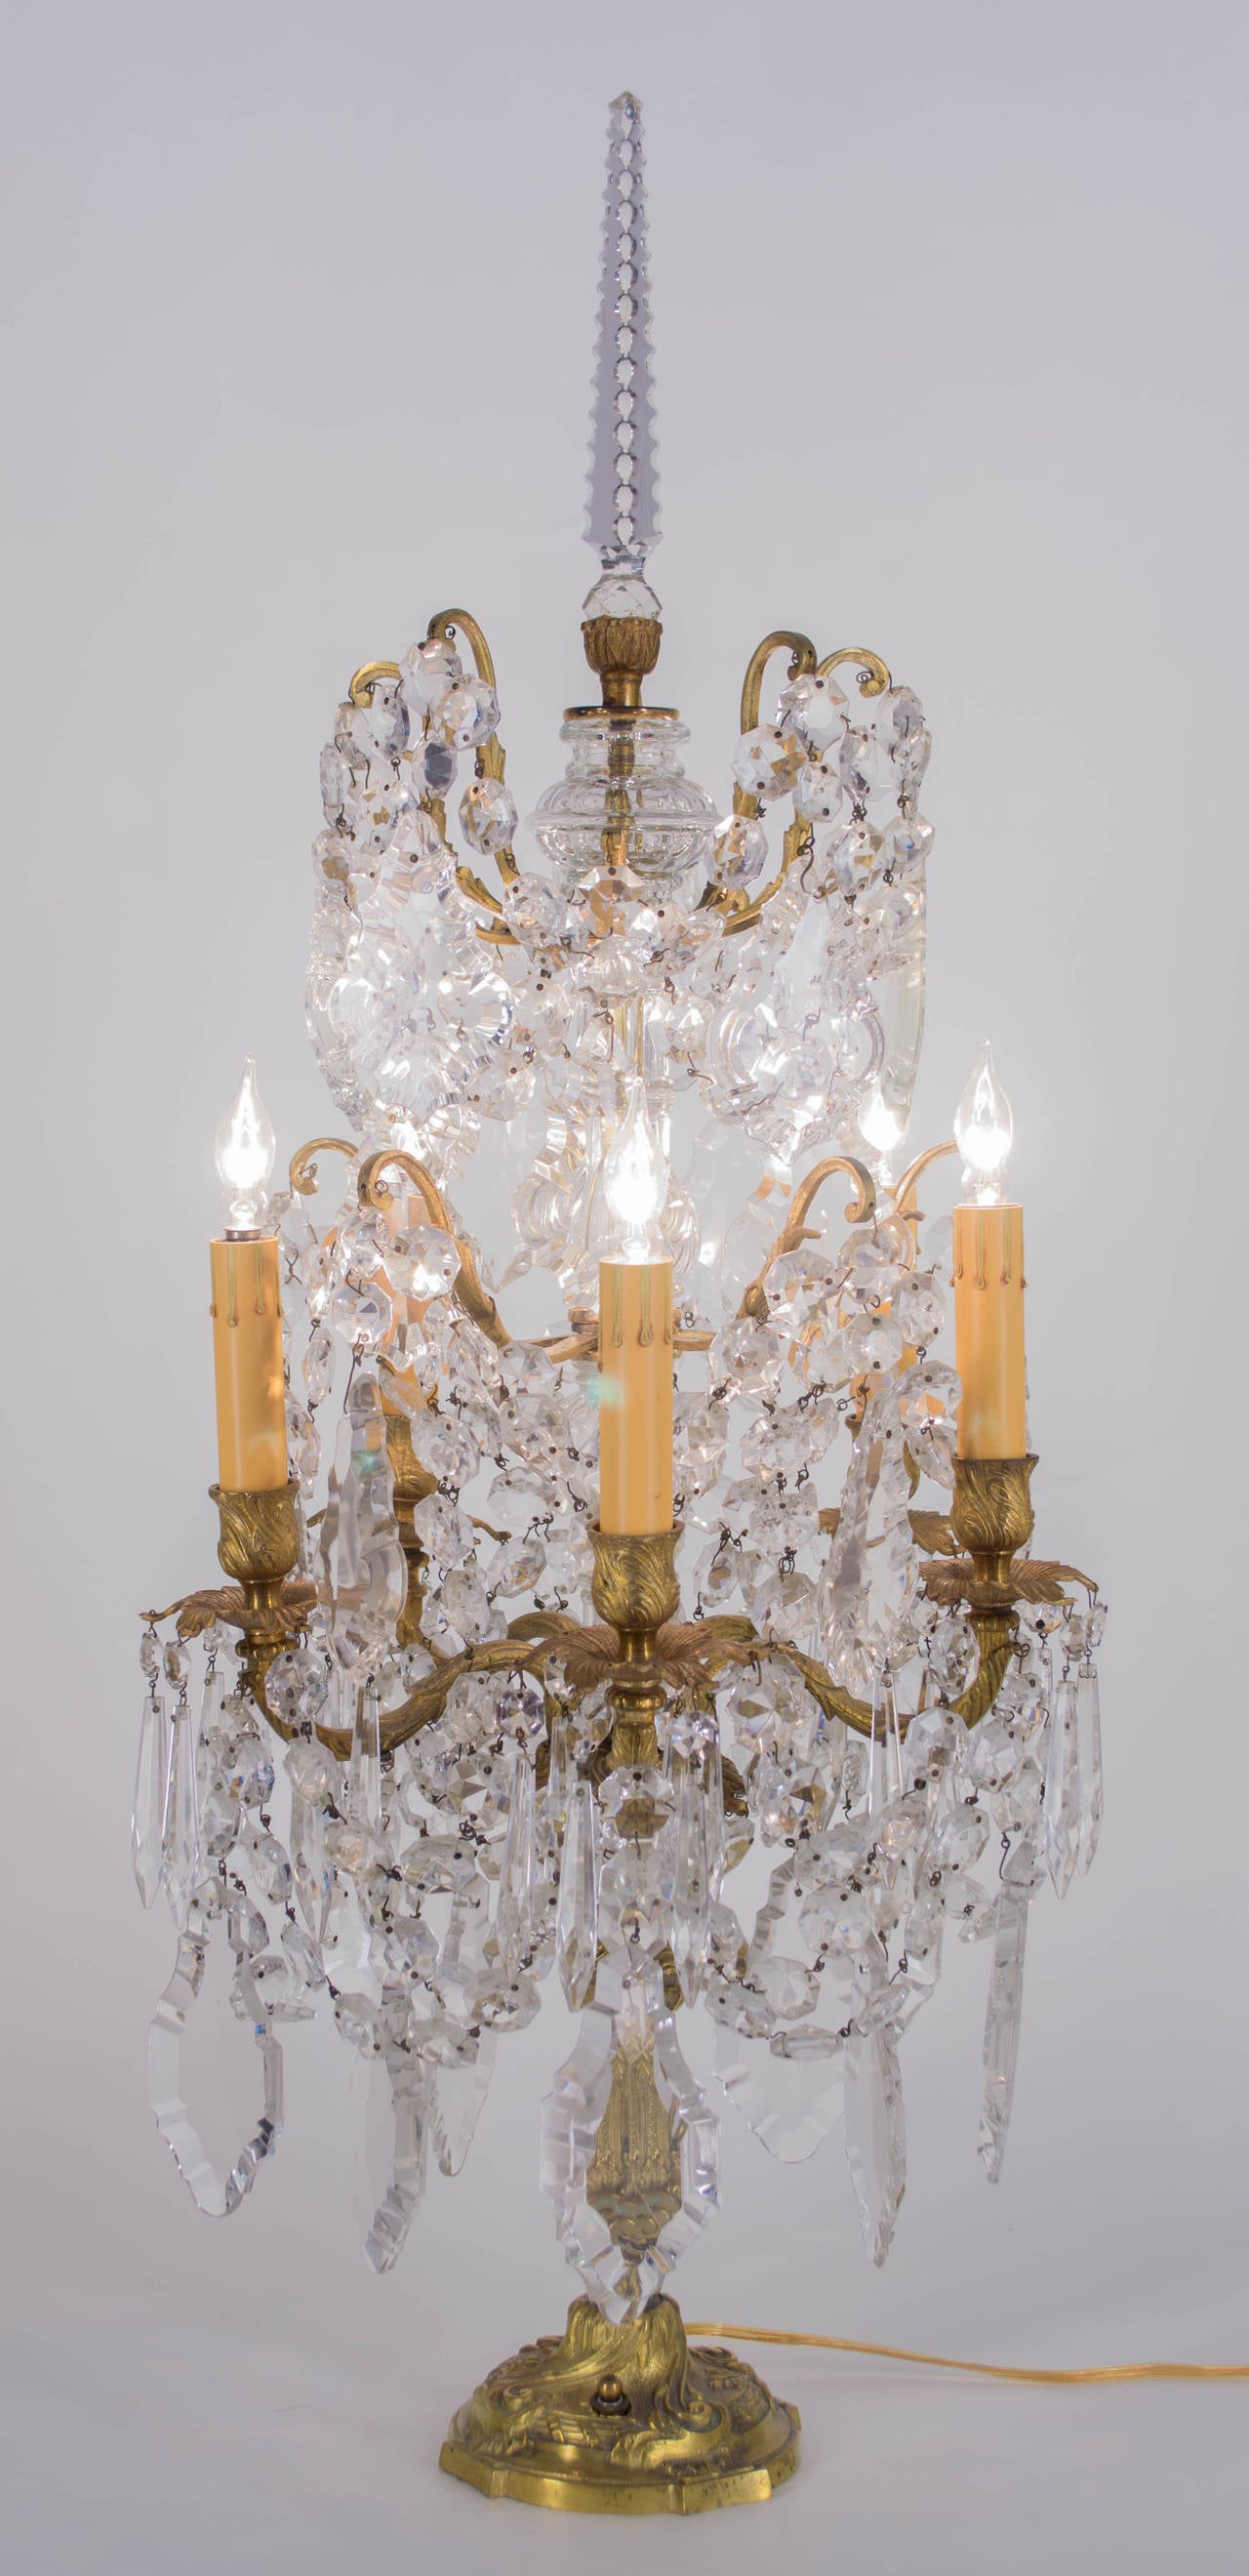 An early 20th century French bronze six-light girandole dripping with crystal prisms including dangling pendalogues, swags of jewel chains between each arm, ribbed glass columns and a cut crystal spire. Rewired. 
More photos available upon request.